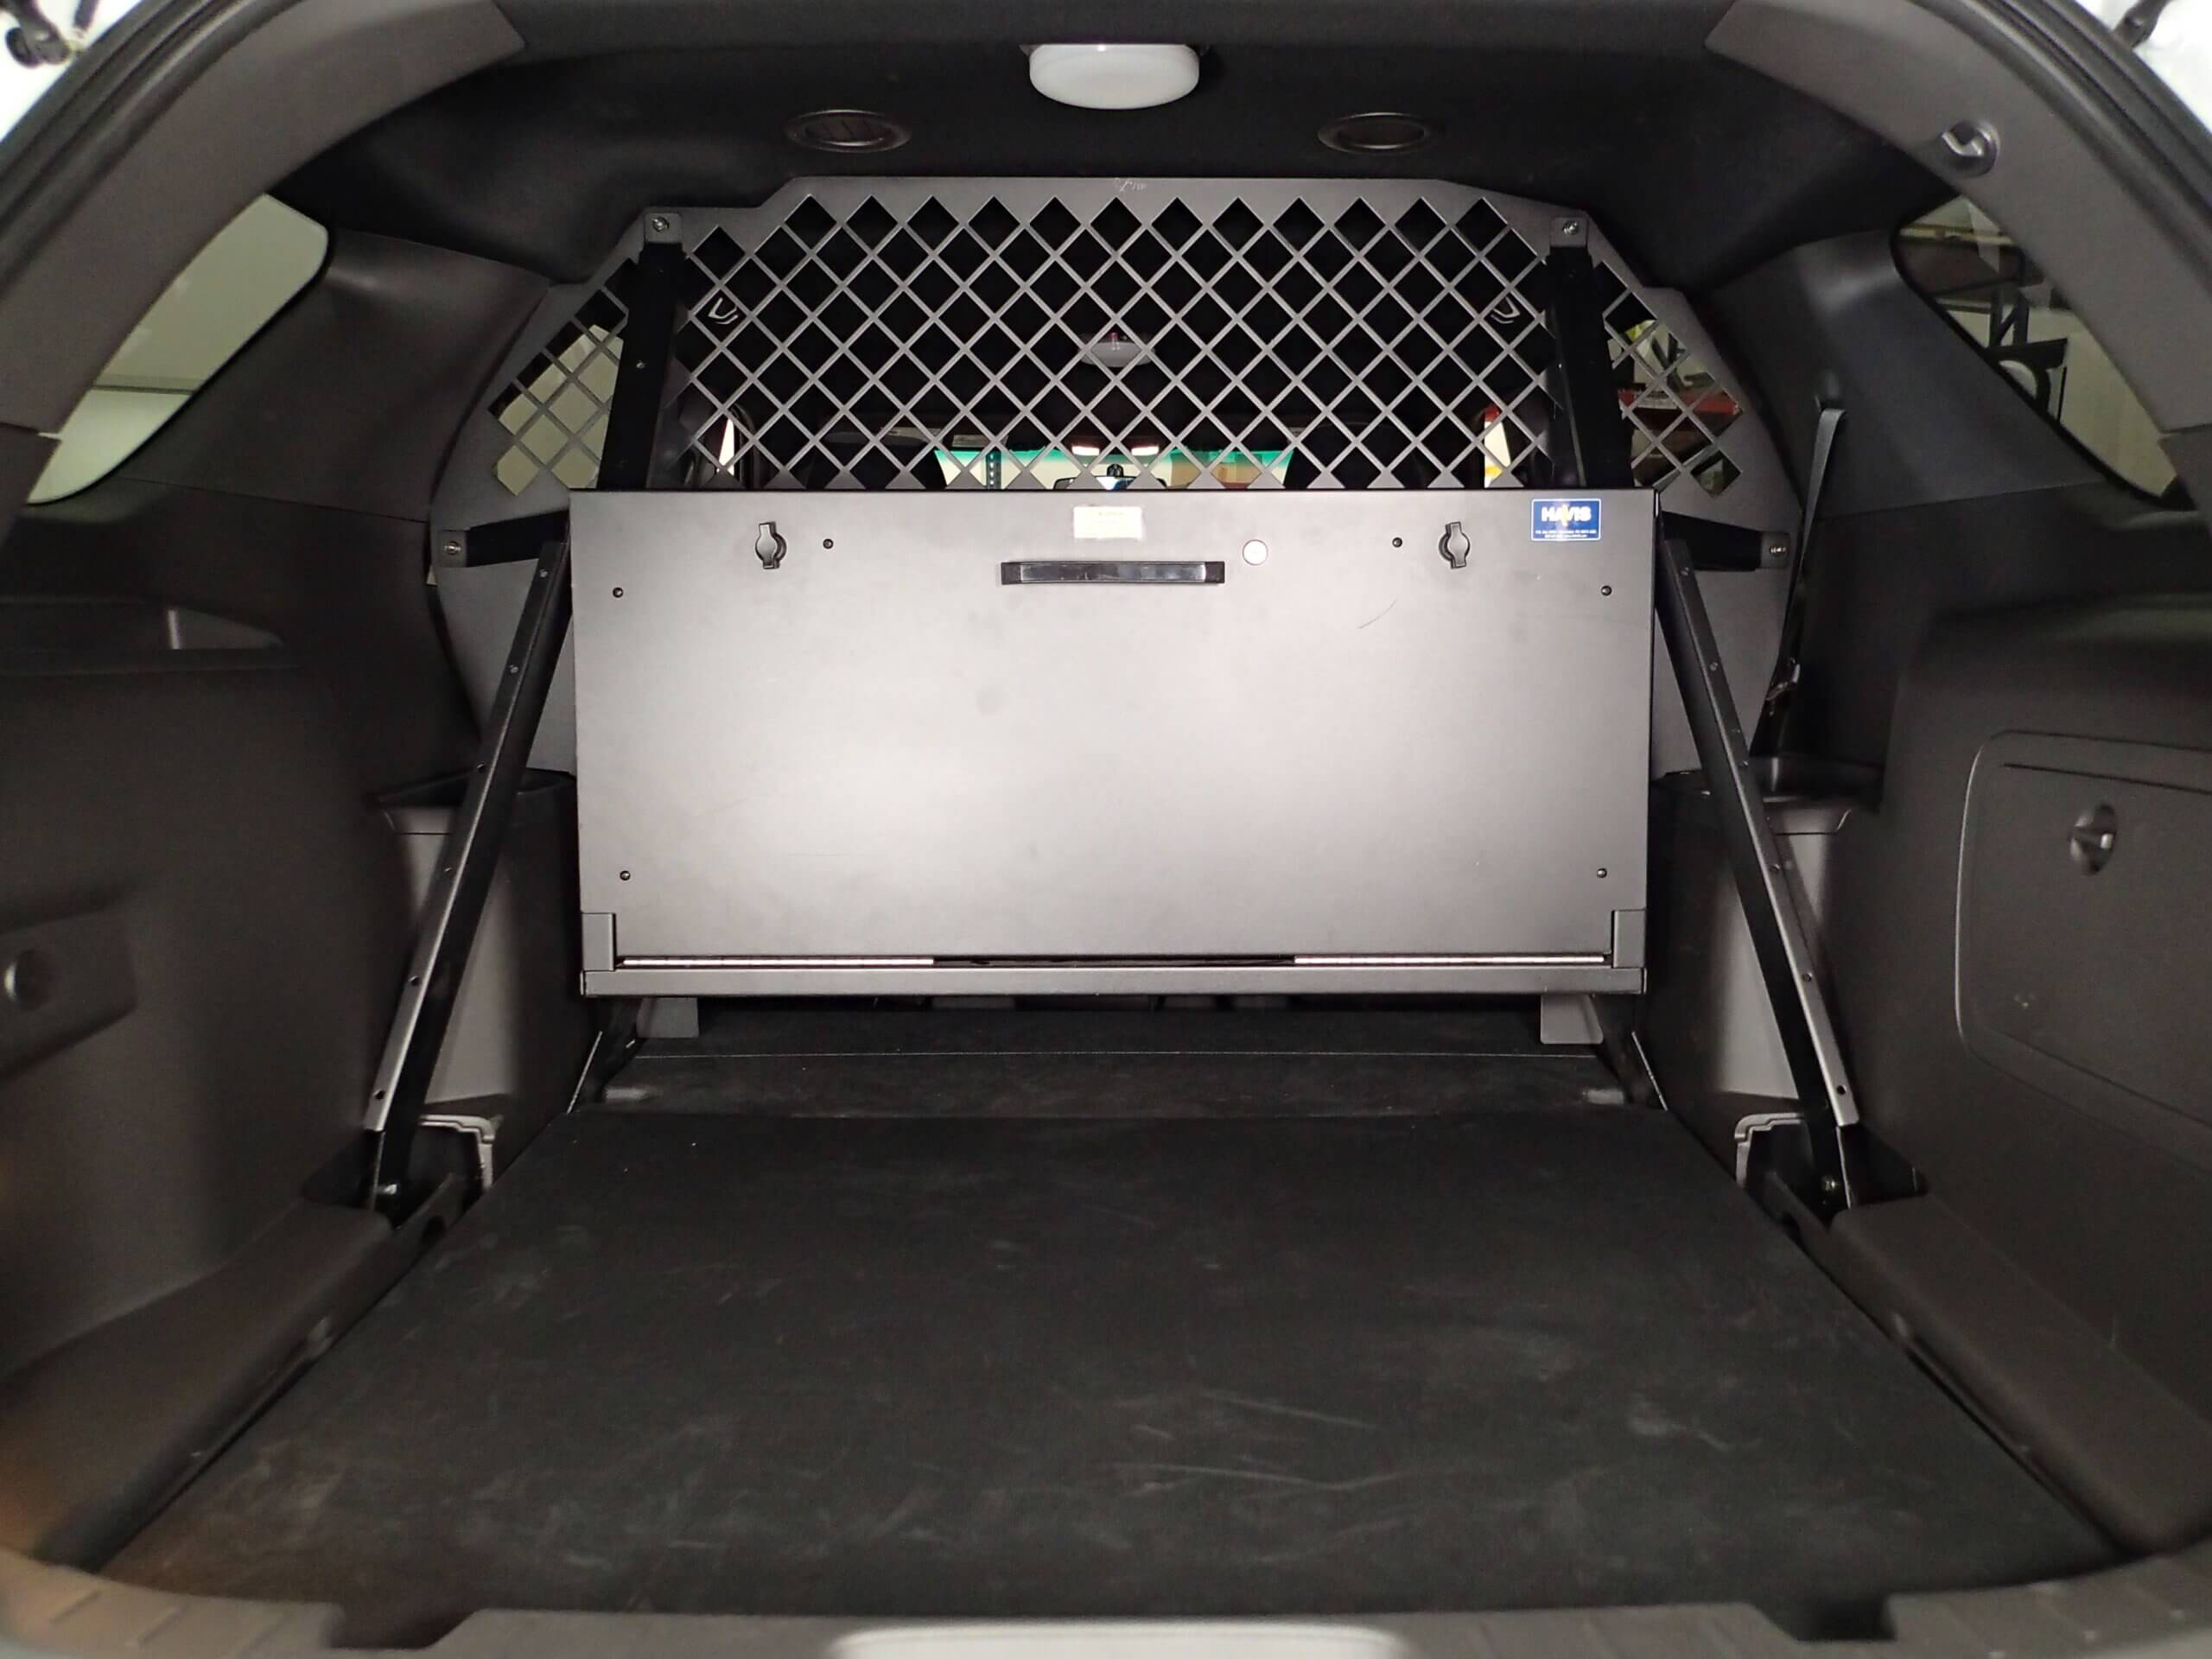 DISCONTINUED – Rear upper partition option fits behind seat in 2013-2019 Interceptor Utility Vehicle